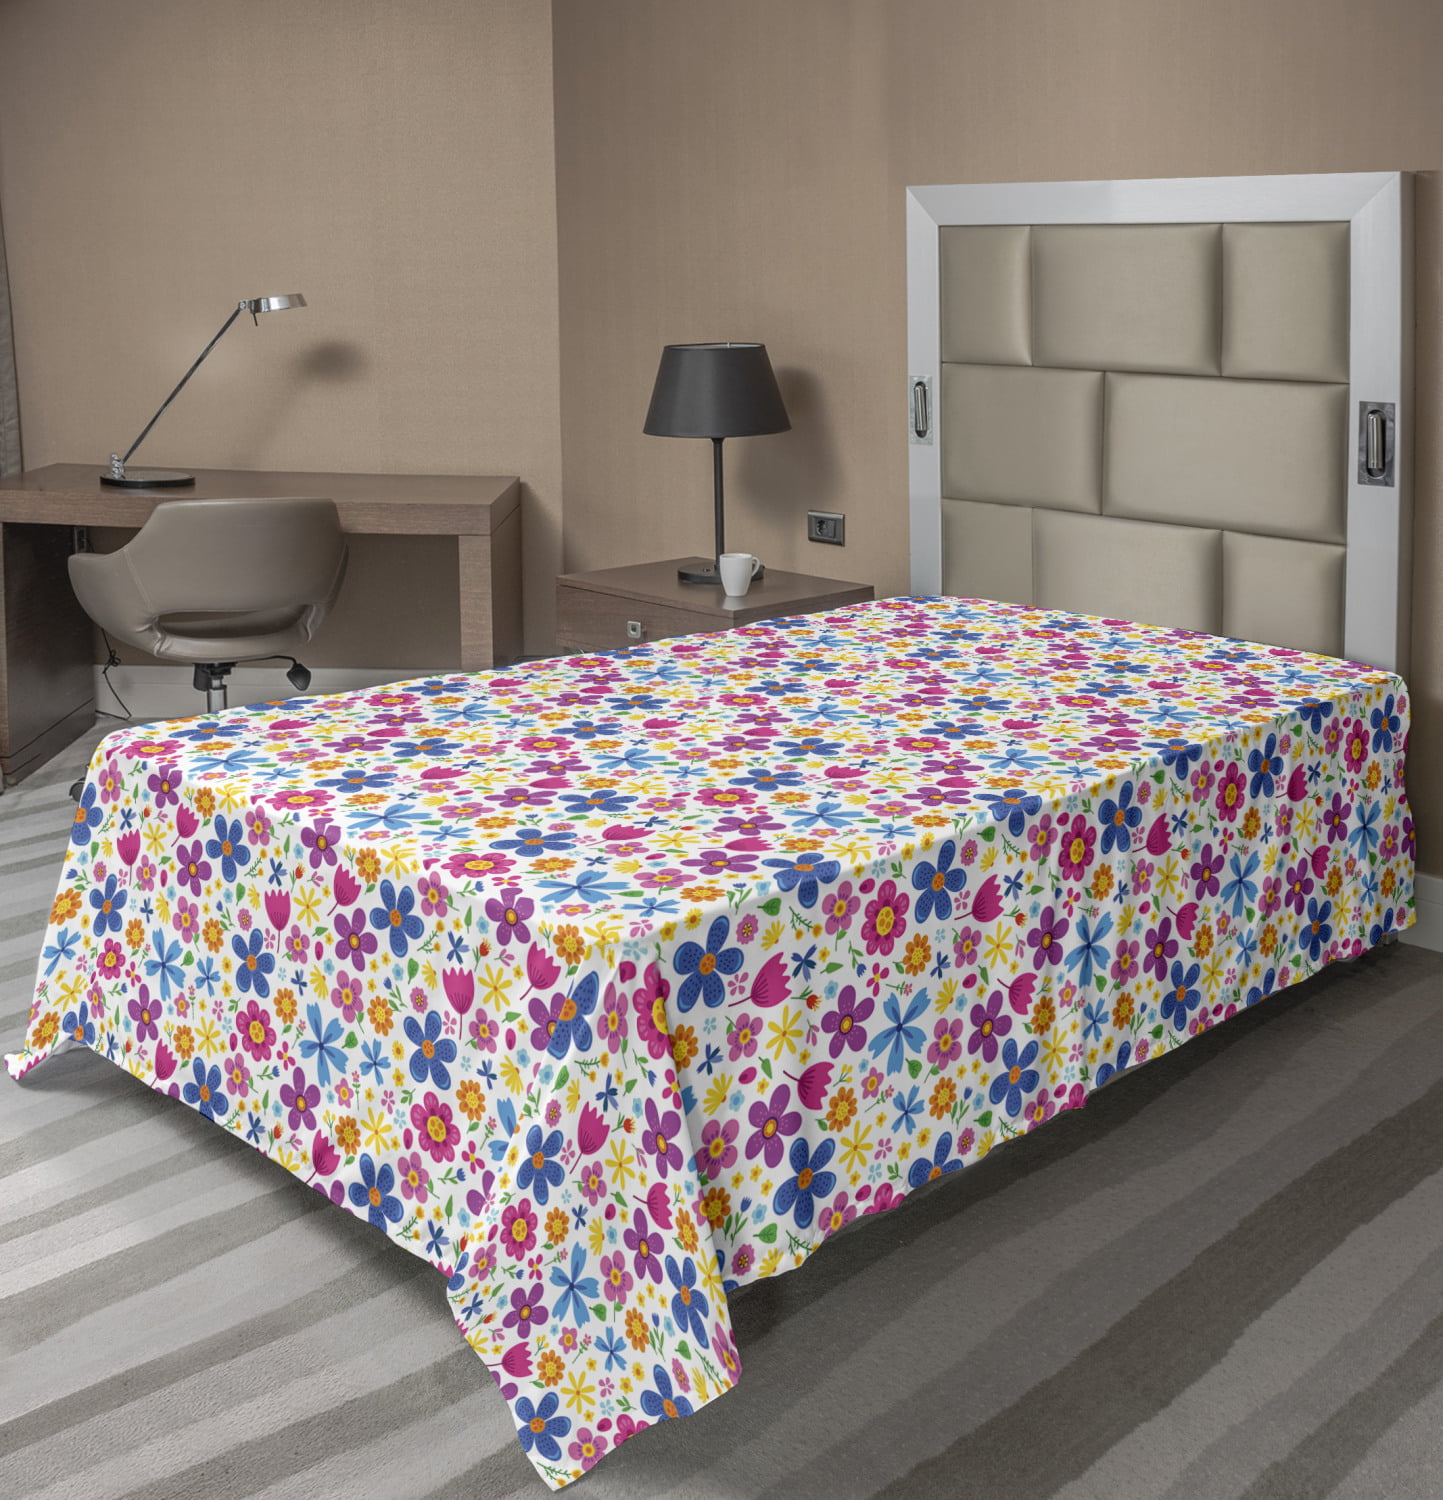 Floral Flat Sheet Cartoon Design Funny Spring Thrill Pattern With Flower Petals Garden Soft Comfortable Top Sheet Decorative Bedding 1 Piece 6 Sizes Multicolor By Ambesonne Walmart Com Walmart Com